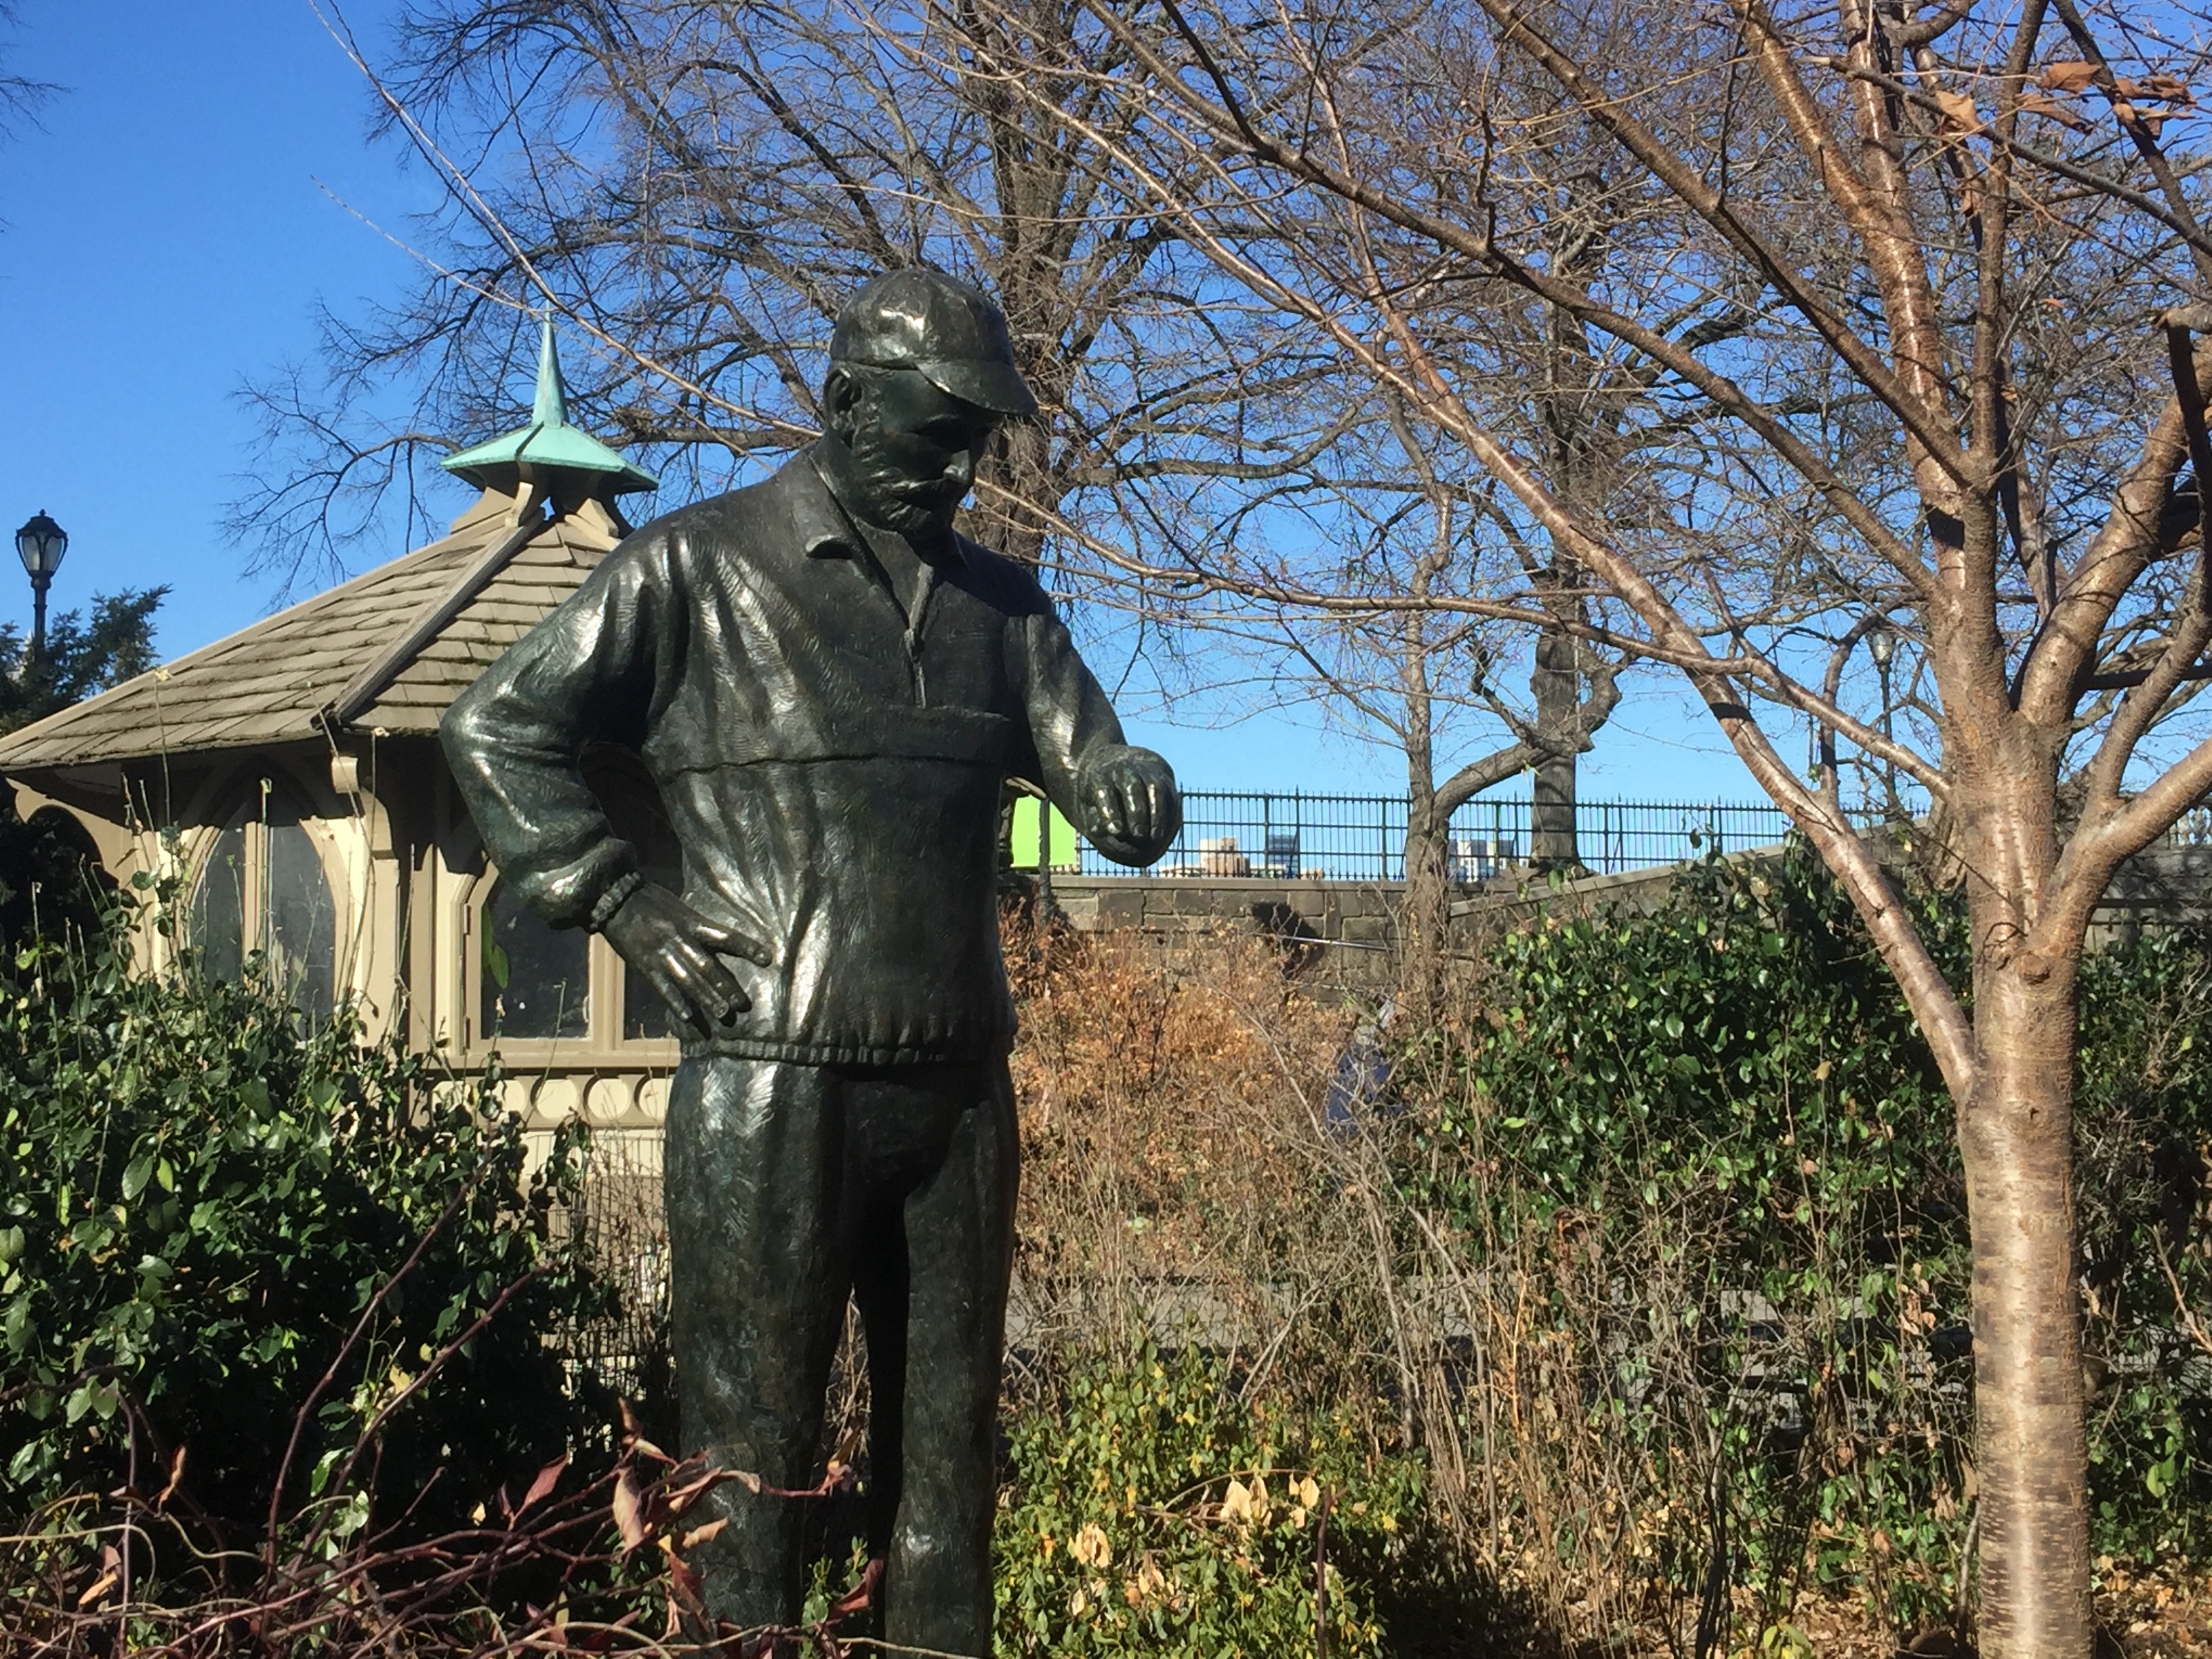 Fred LeBowâ€™s Statue in Central Park Reminds us of the Man